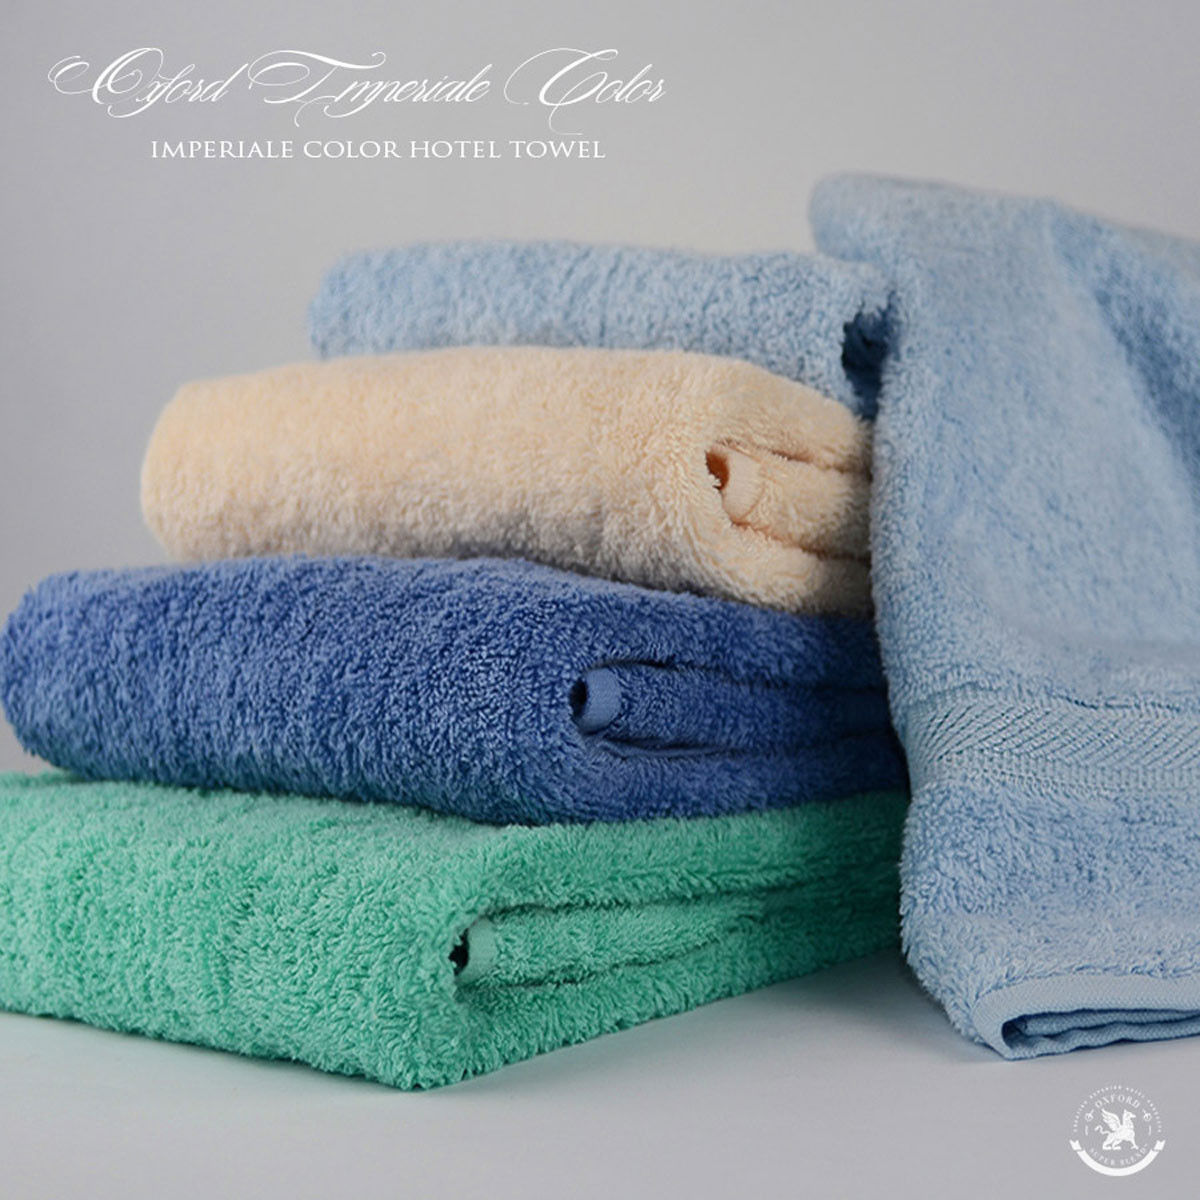 What materials are the Oxford Imperiale Kashmir Green Oxford towels made of?